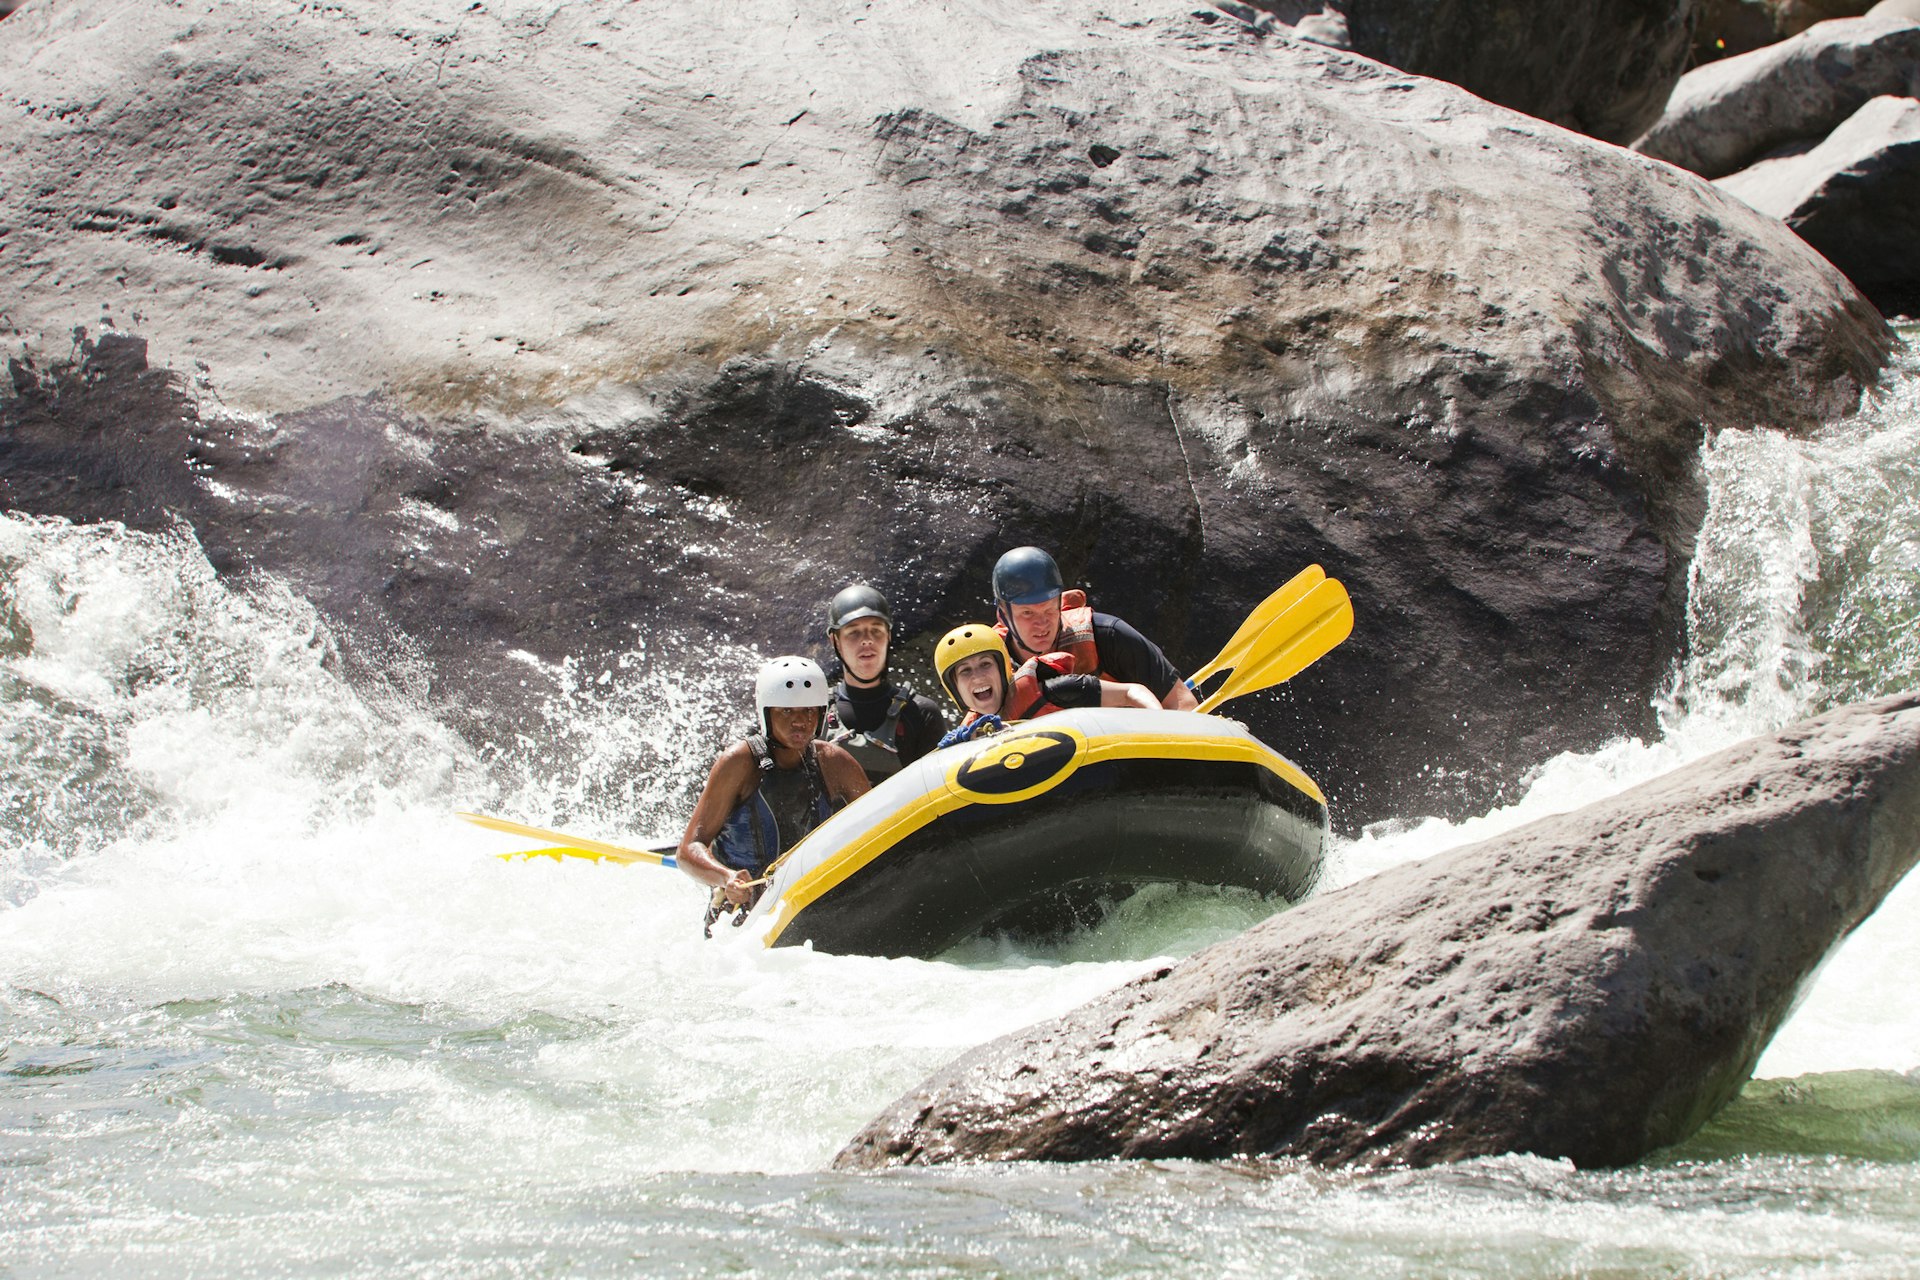 A group of four people, all wearing helmets, sit aboard a white-water raft as they hurtle down the Rio Cangrejal in Honduras with huge boulders in the background